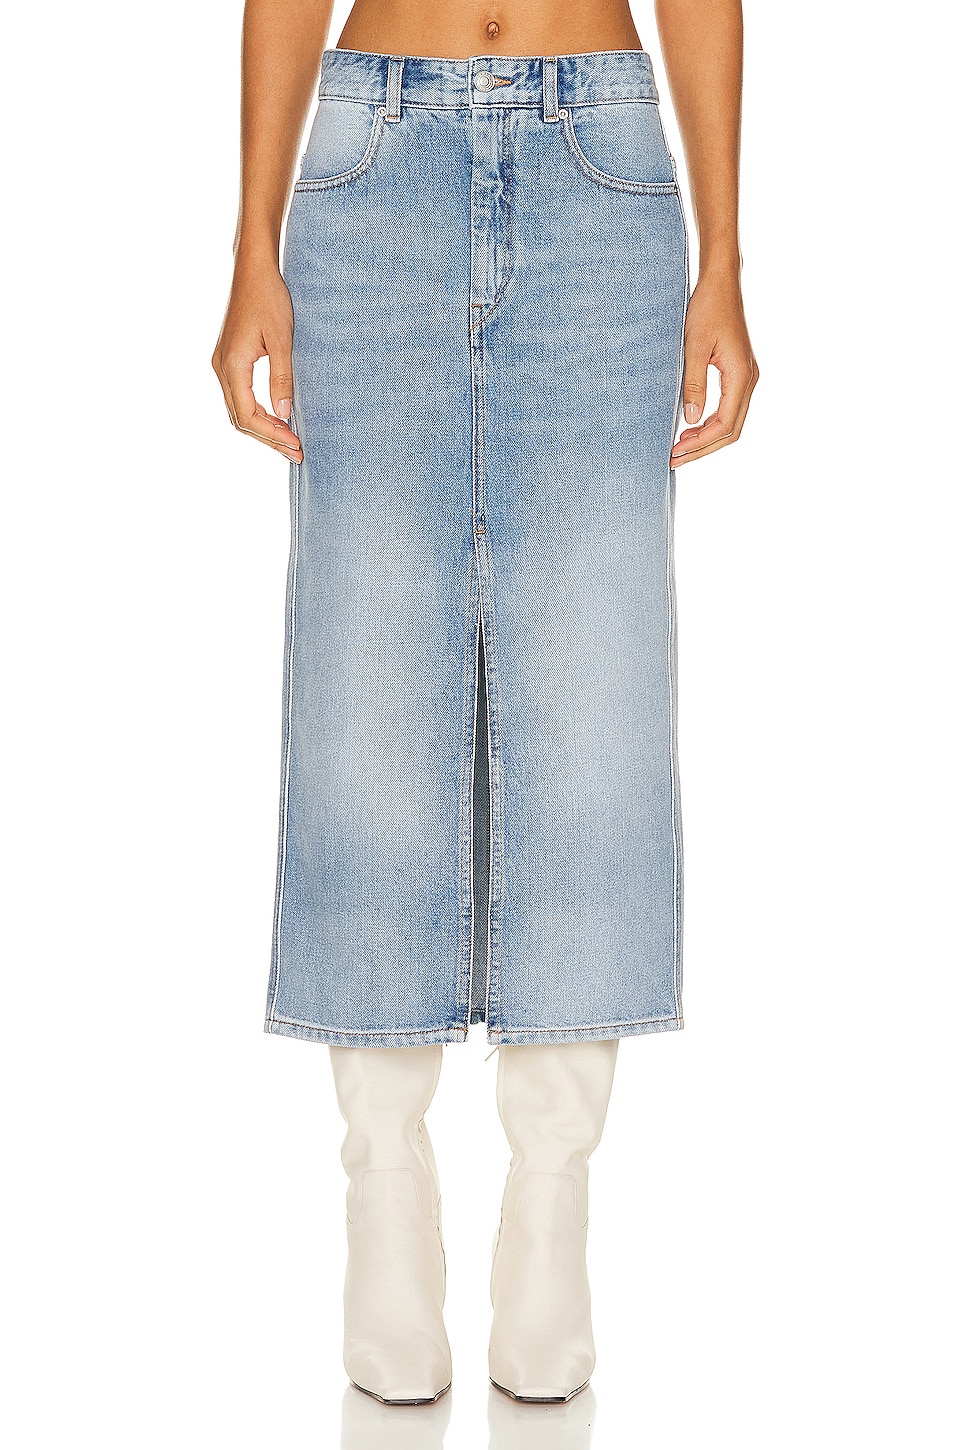 Image 1 of Isabel Marant Julicia Skirt in Ice Blue